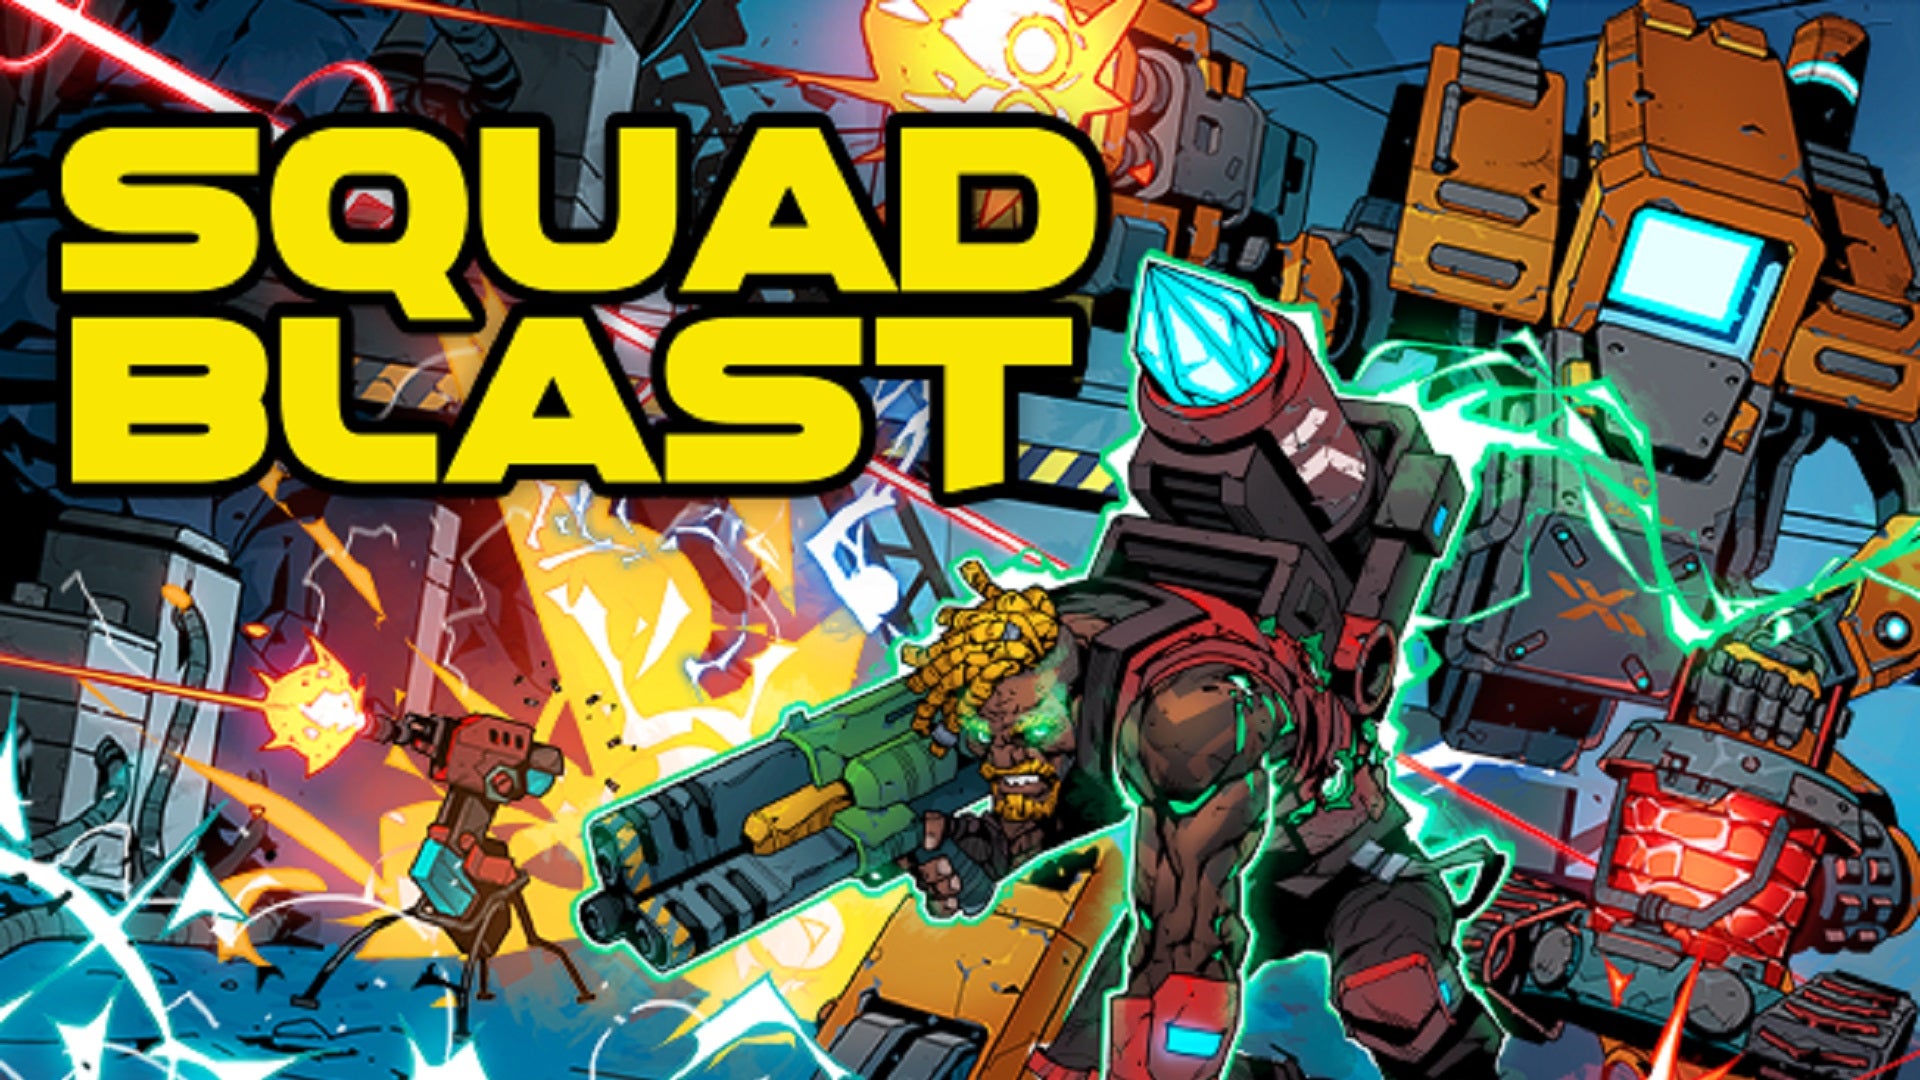 Official art for Squad Blast